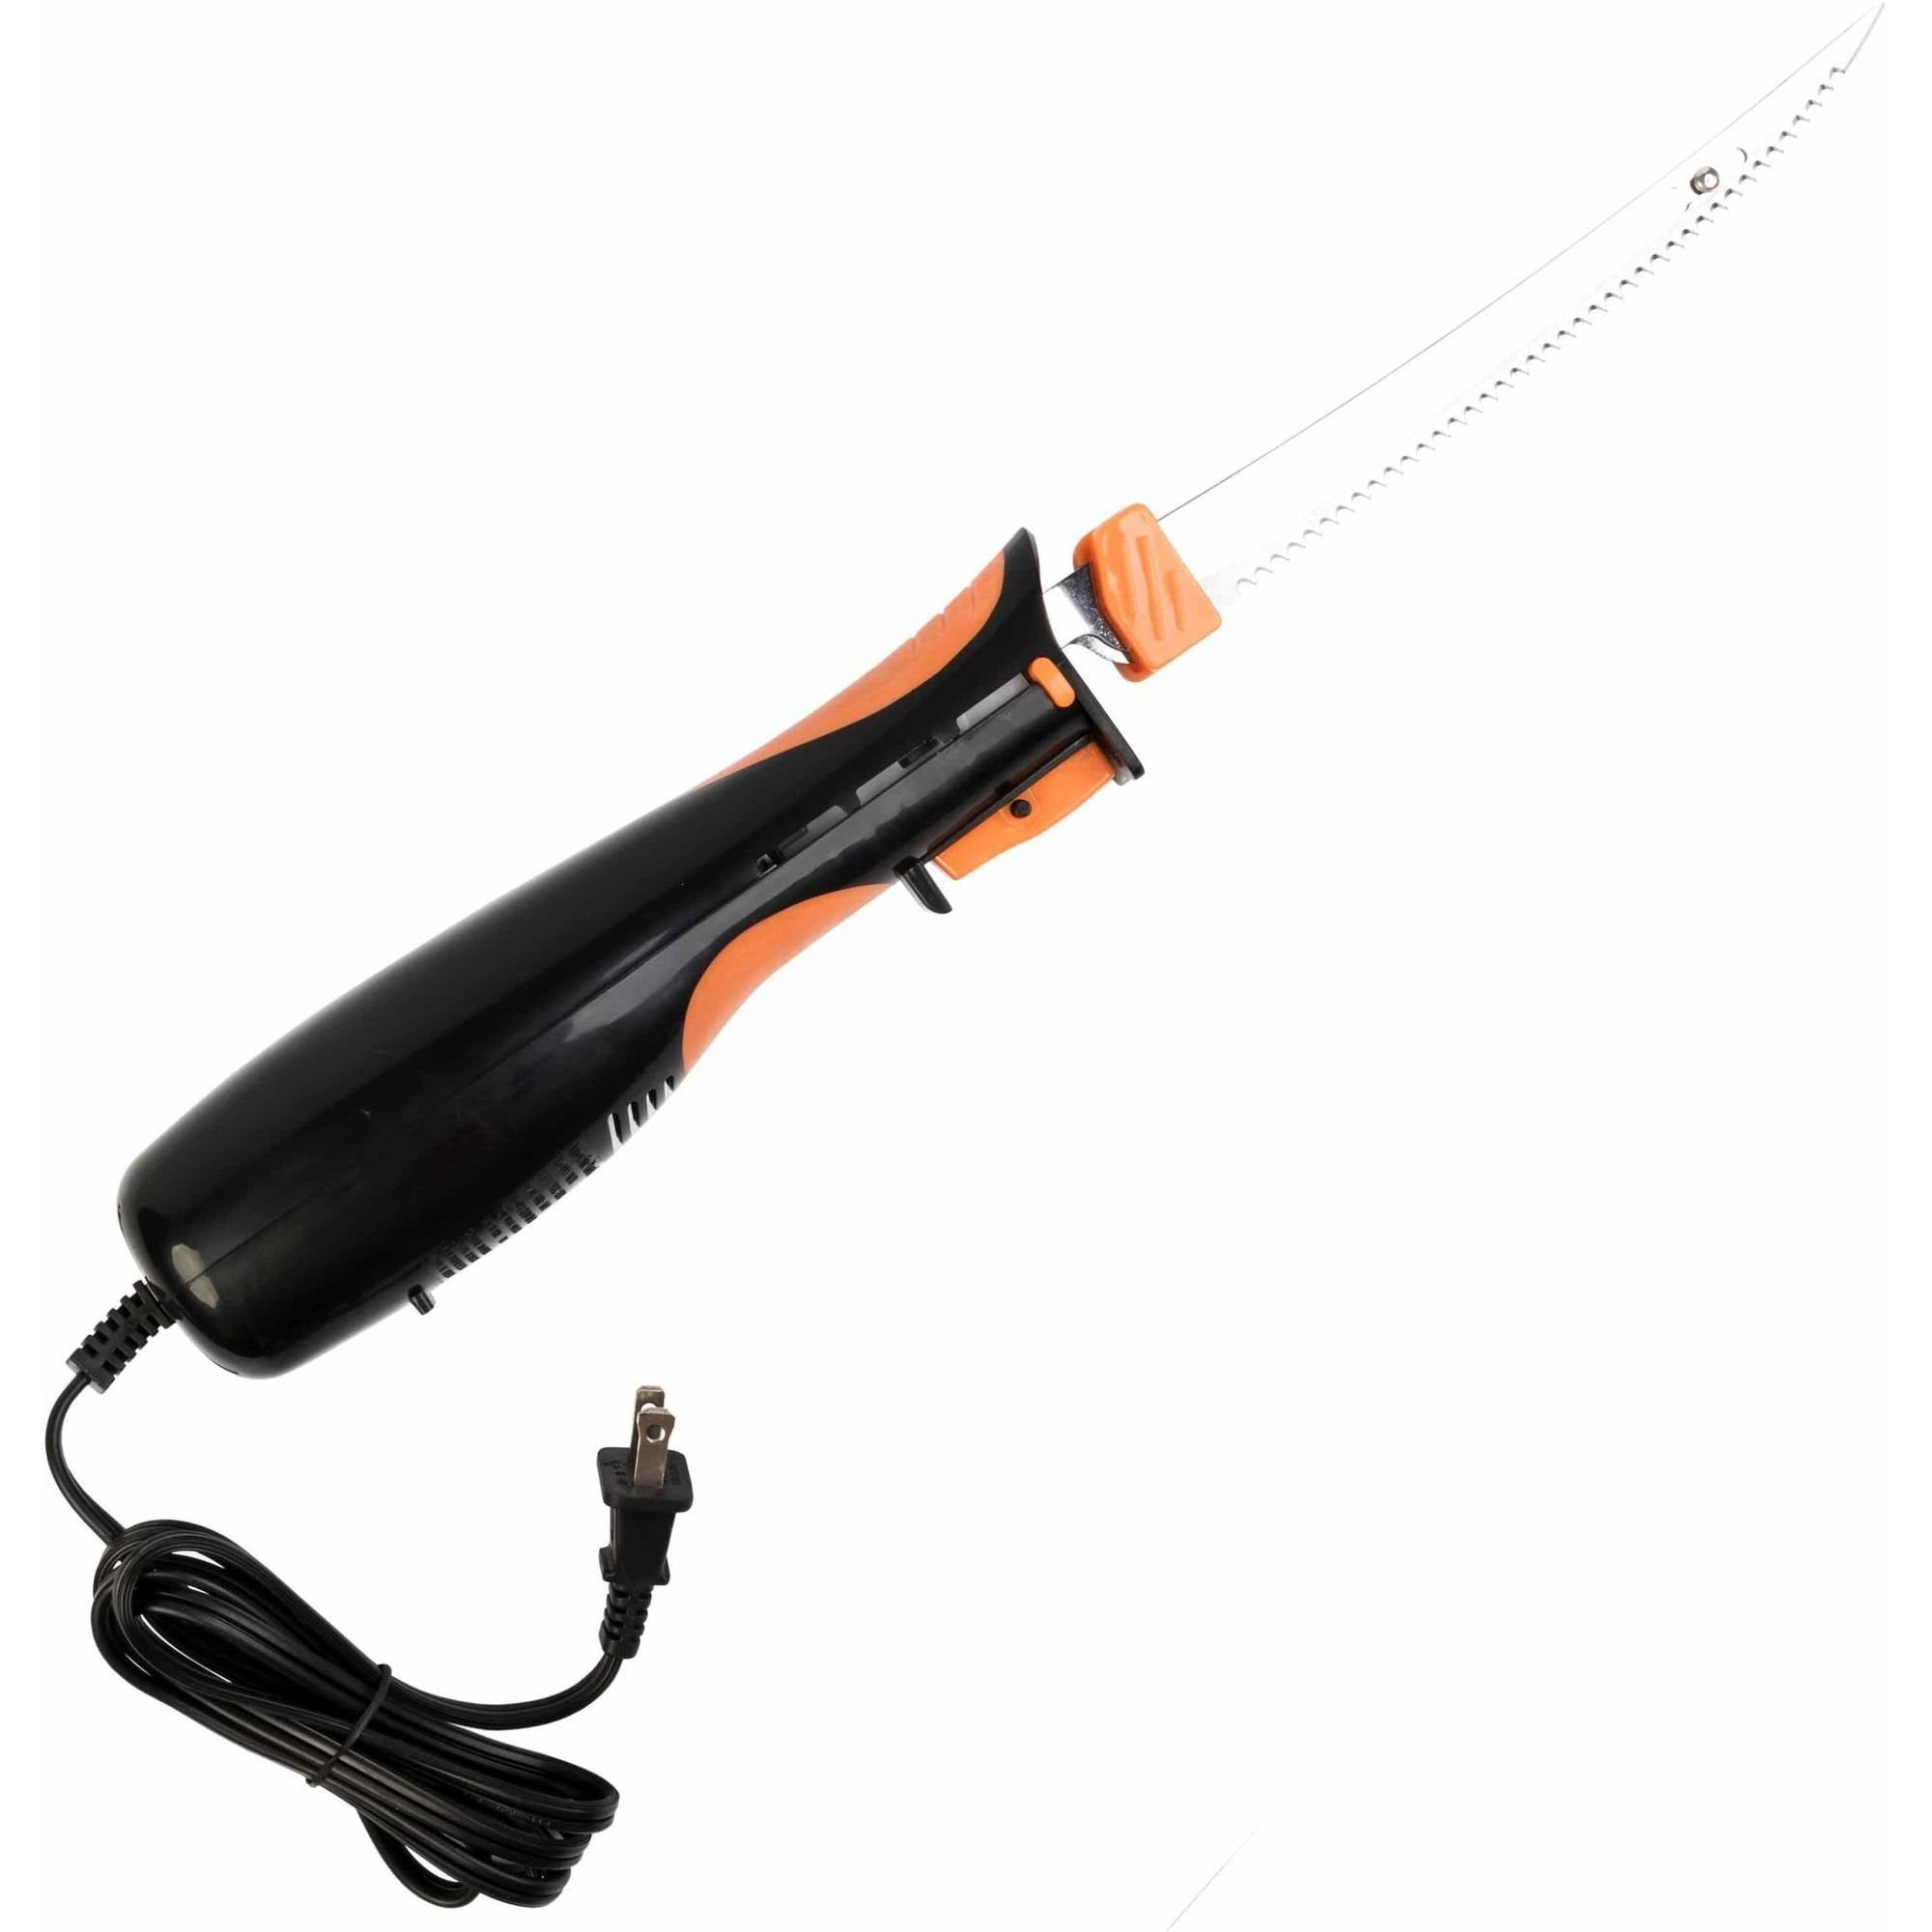 Ozark Trail Electric Fishing Fillet Knife with serrrated blade - Walmart